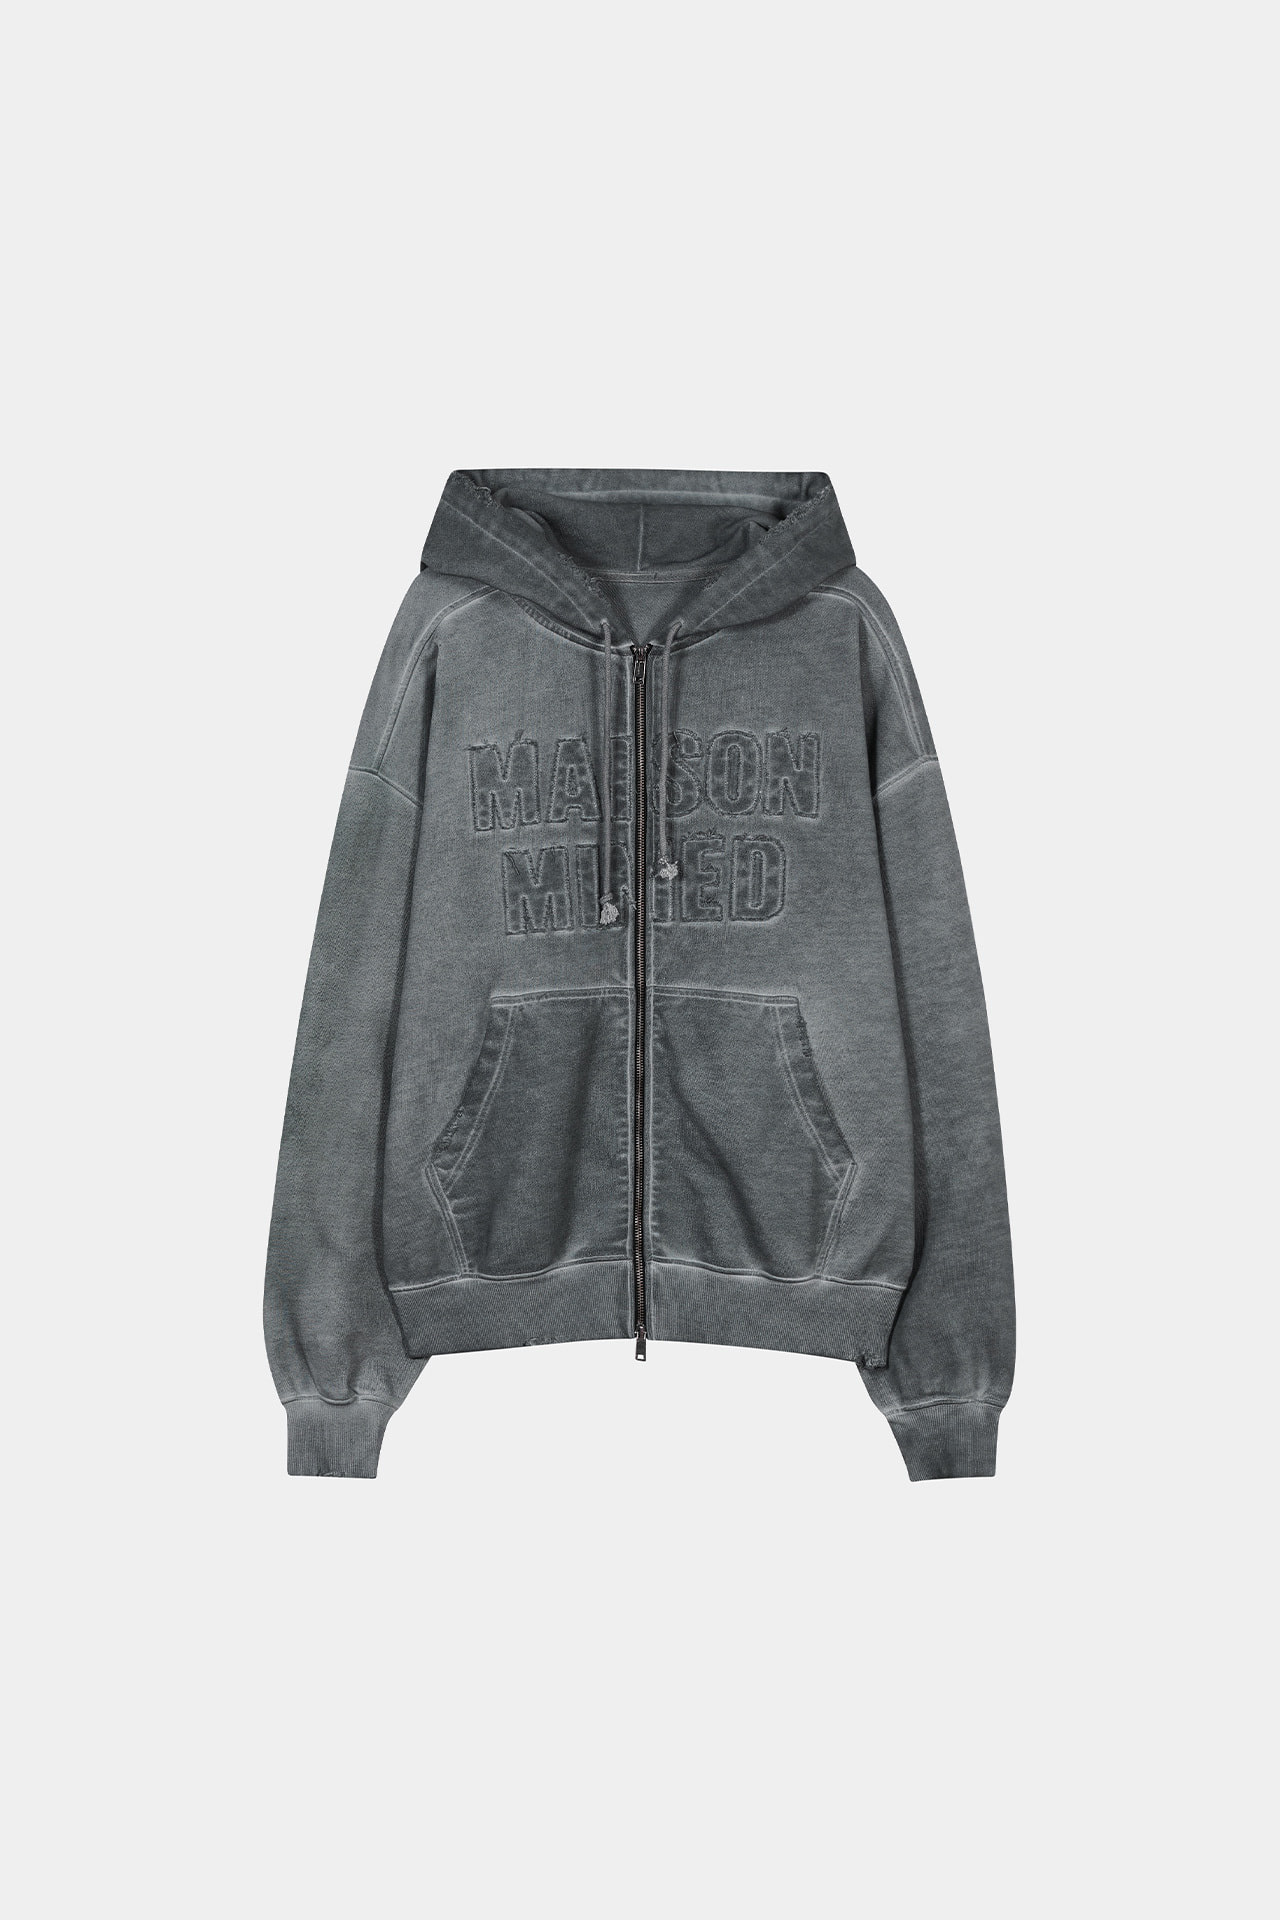 MINED CUT OUT PATCH HOOD ZIP-UP GREY메종미네드 MAISON MINED 메종미네드